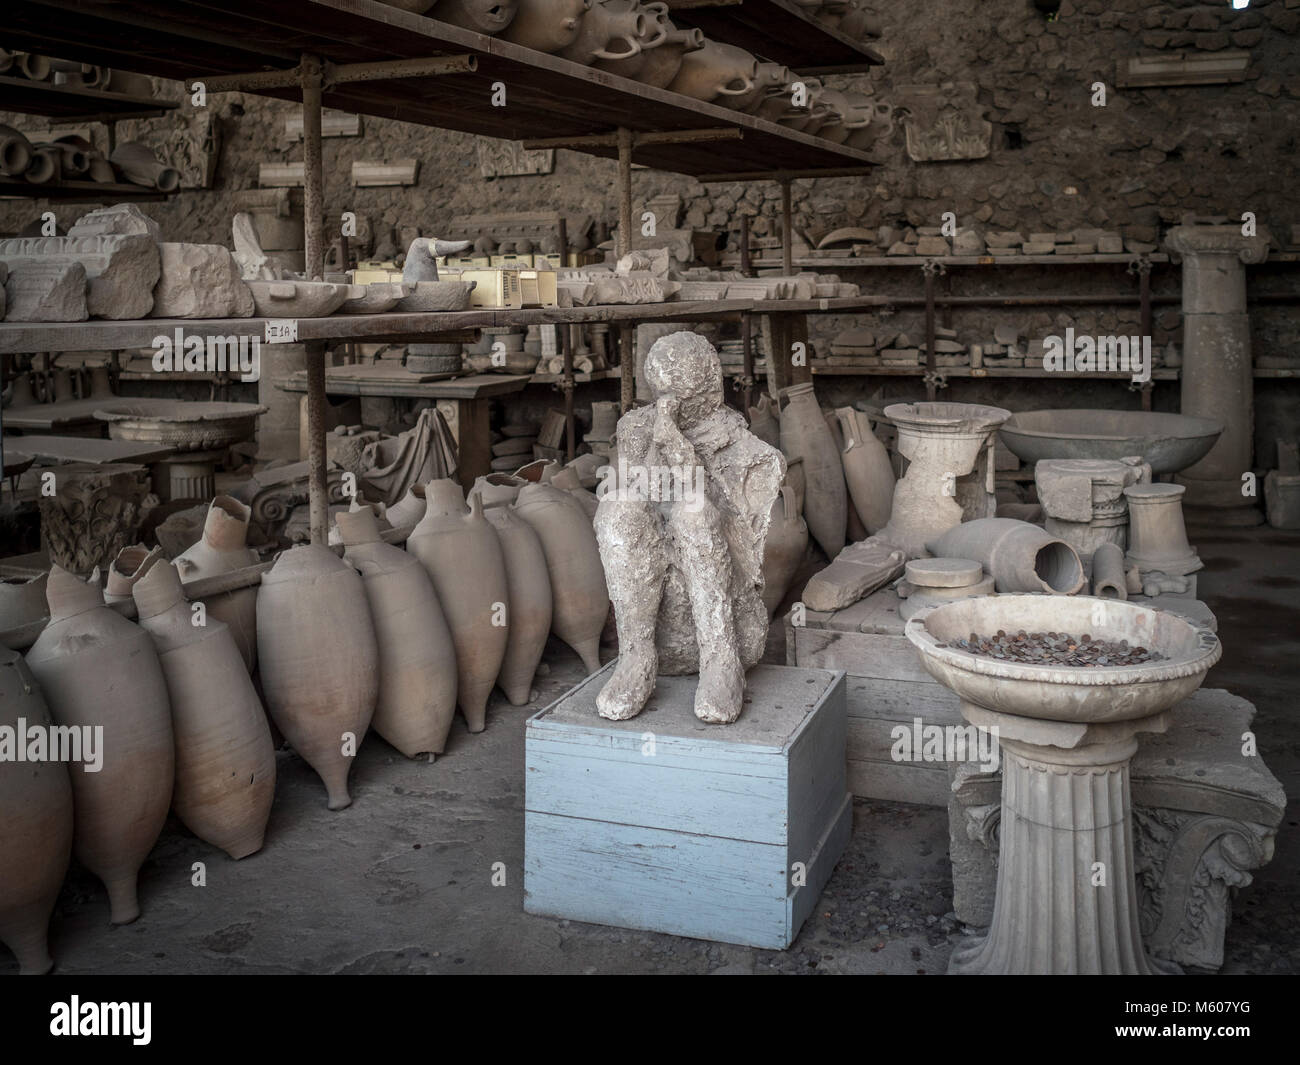 Body cast on display with excavated artefacts at Pompeii, Italy. Stock Photo